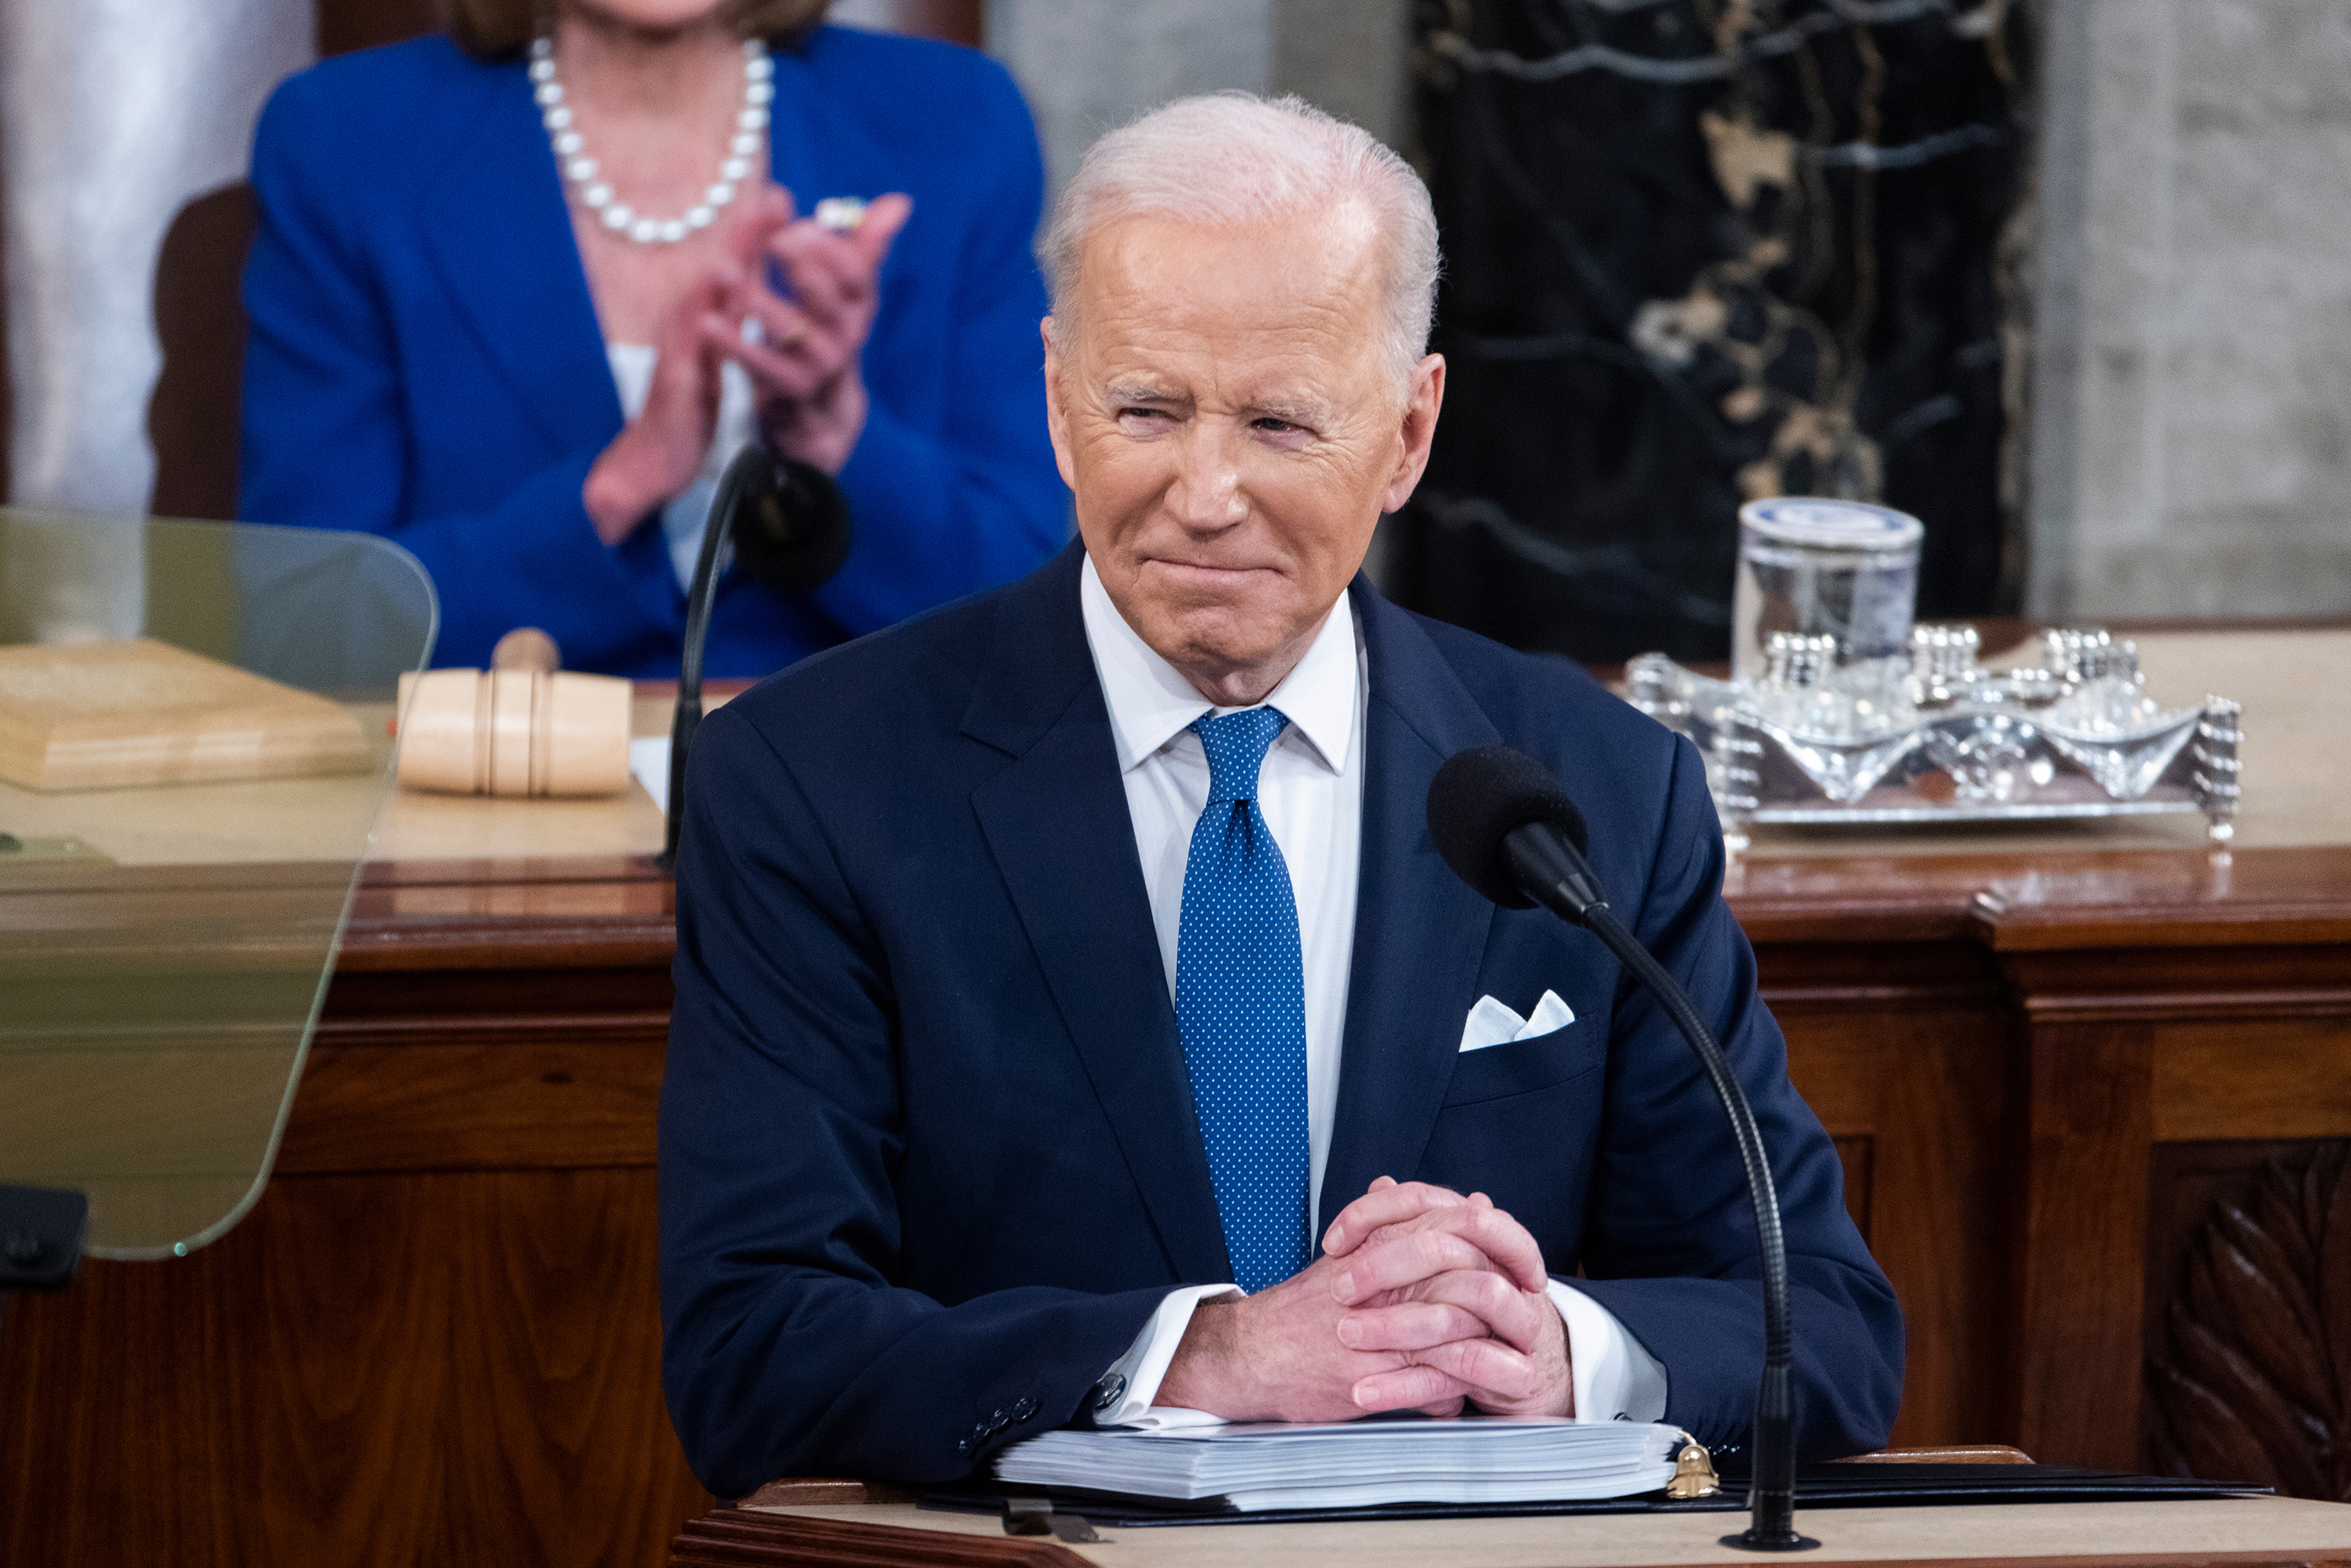 President Biden during the State of the Union